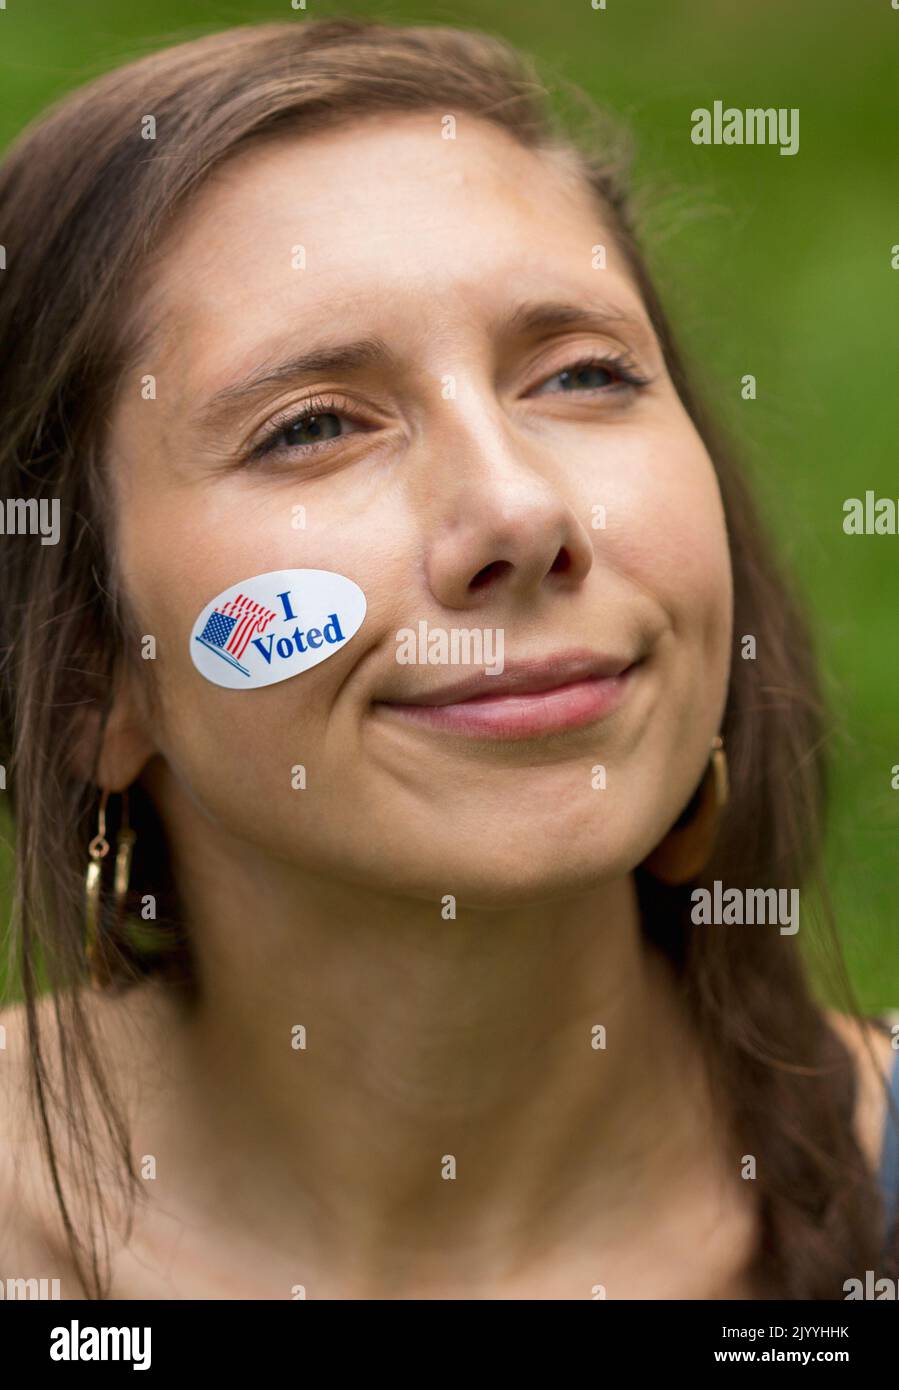 A young woman has a sticker on her face that reads 'I voted.' Stock Photo